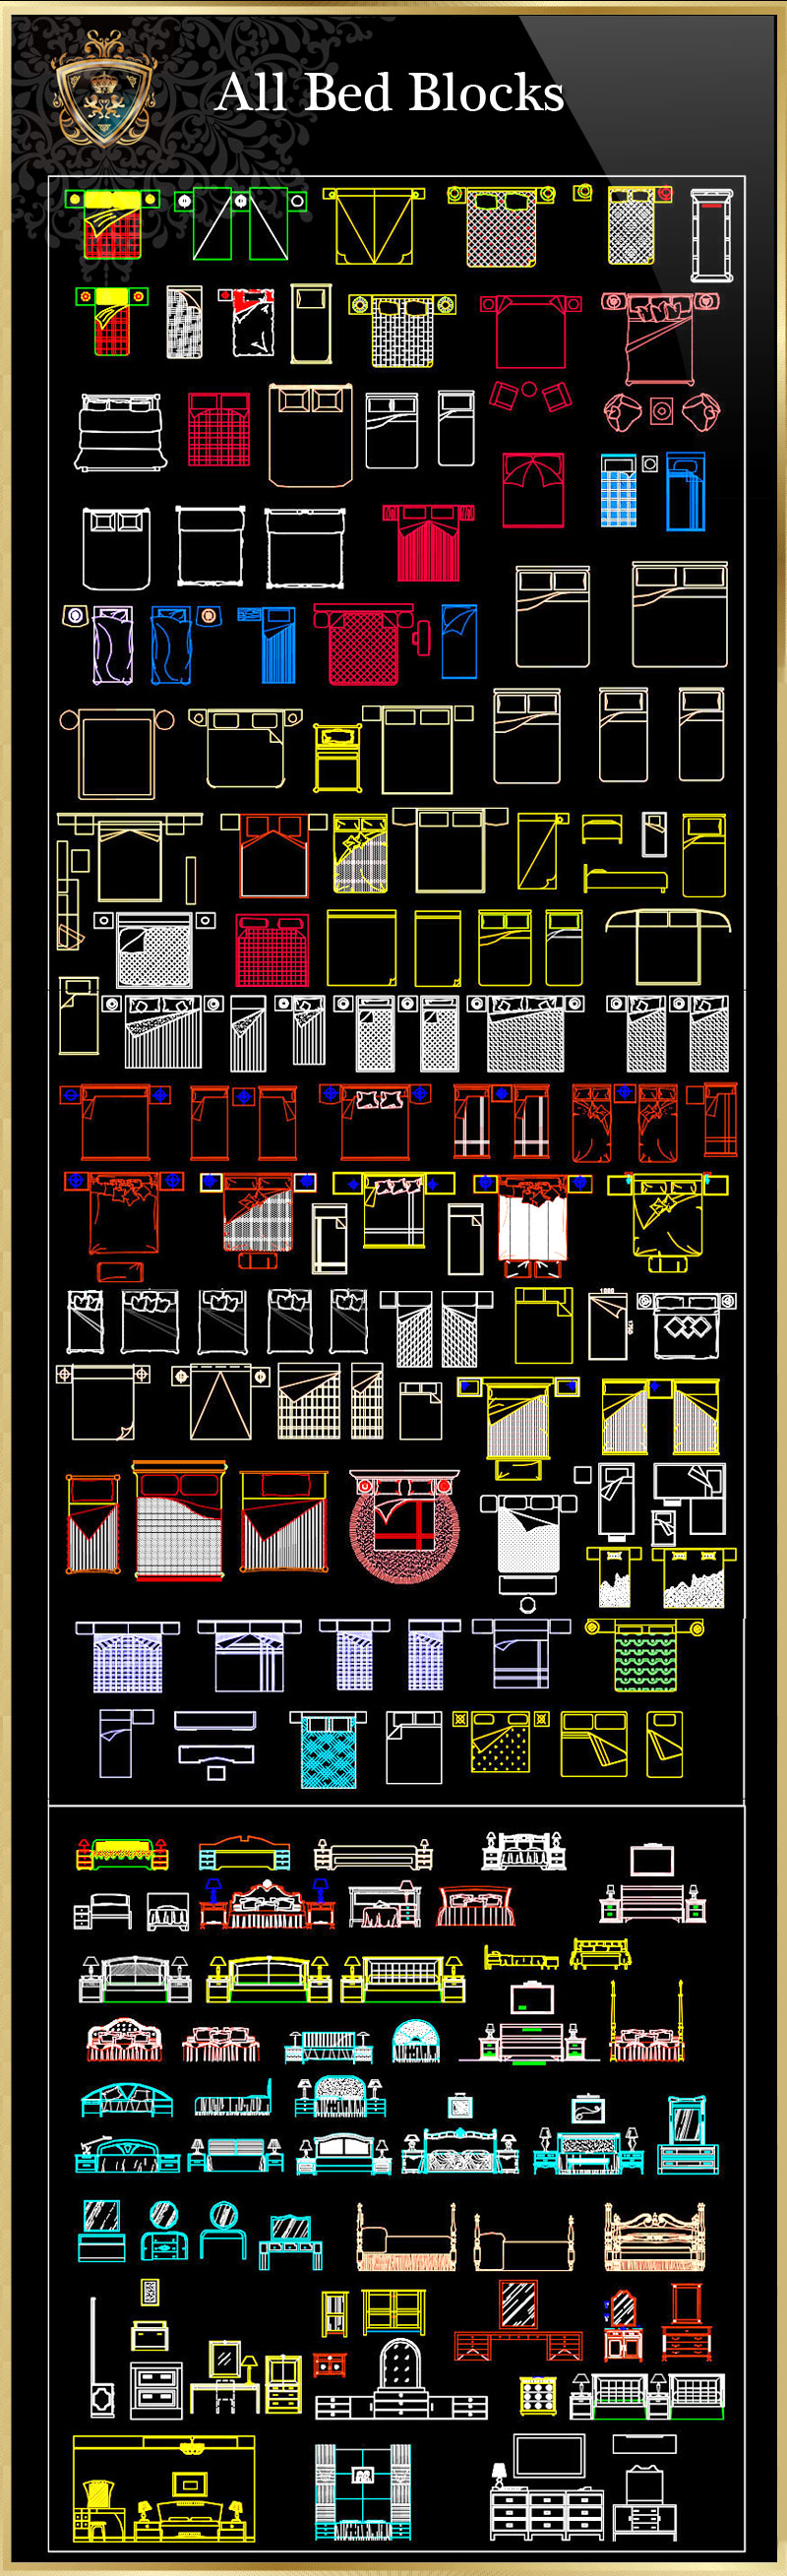 ★【All Bed Blocks】Download Luxury Architectural Design CAD Drawings--Over 20000+ High quality CAD Blocks and Drawings Download!